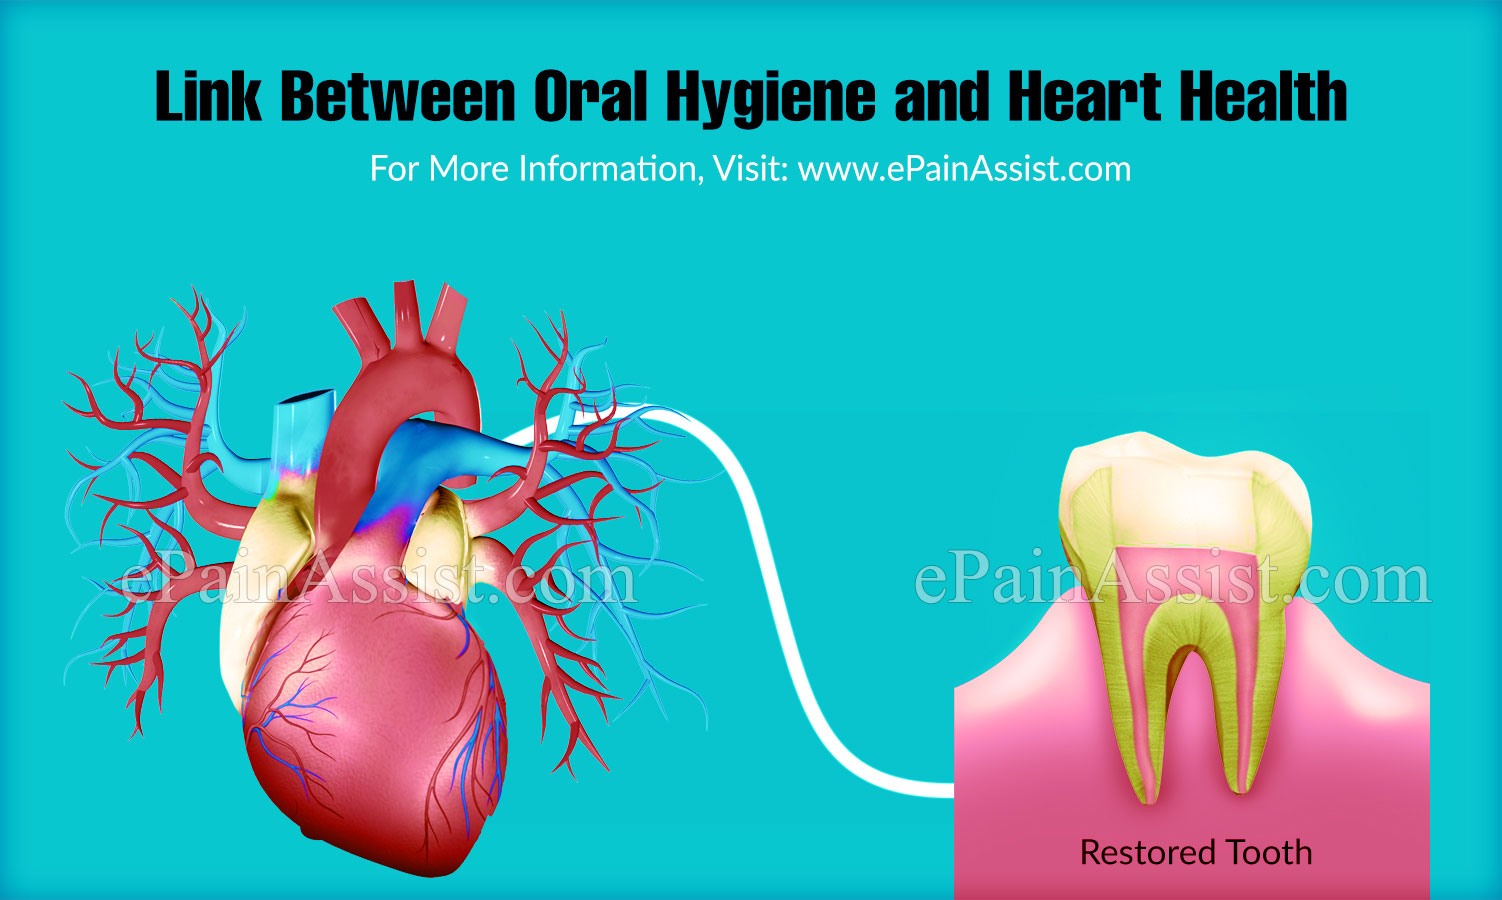 Link Between Oral Hygiene and Heart Health